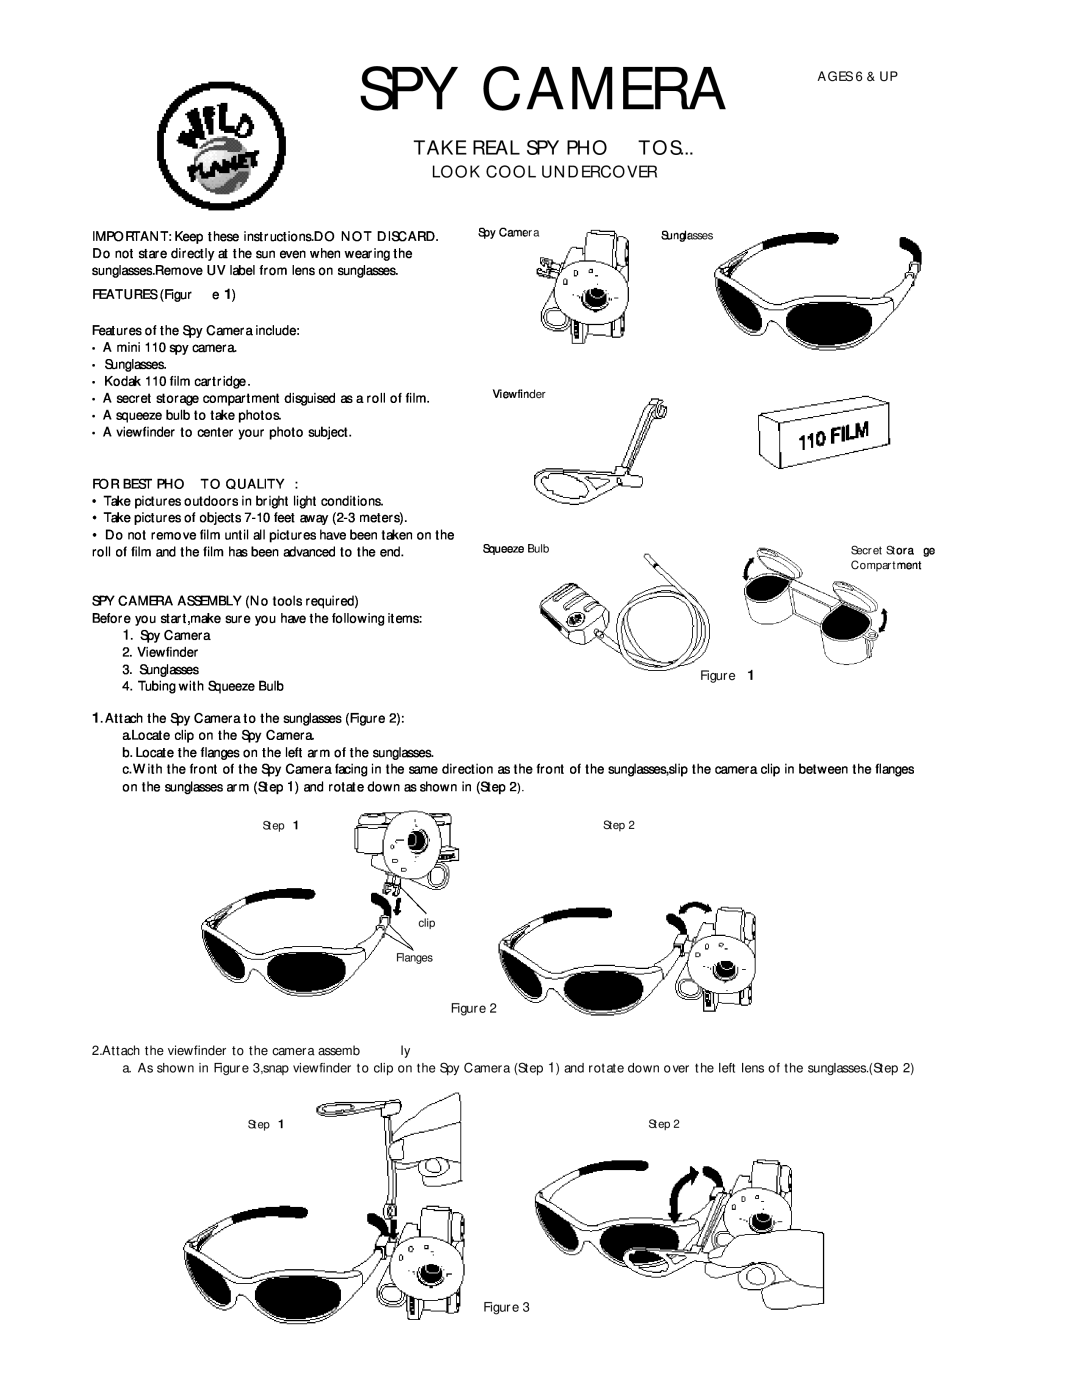 Wild Planet Webcam manual FEATURES Figur e, For Best Pho To Quality, SPY CAMERA ASSEMBLY No tools required, Spy Camera 